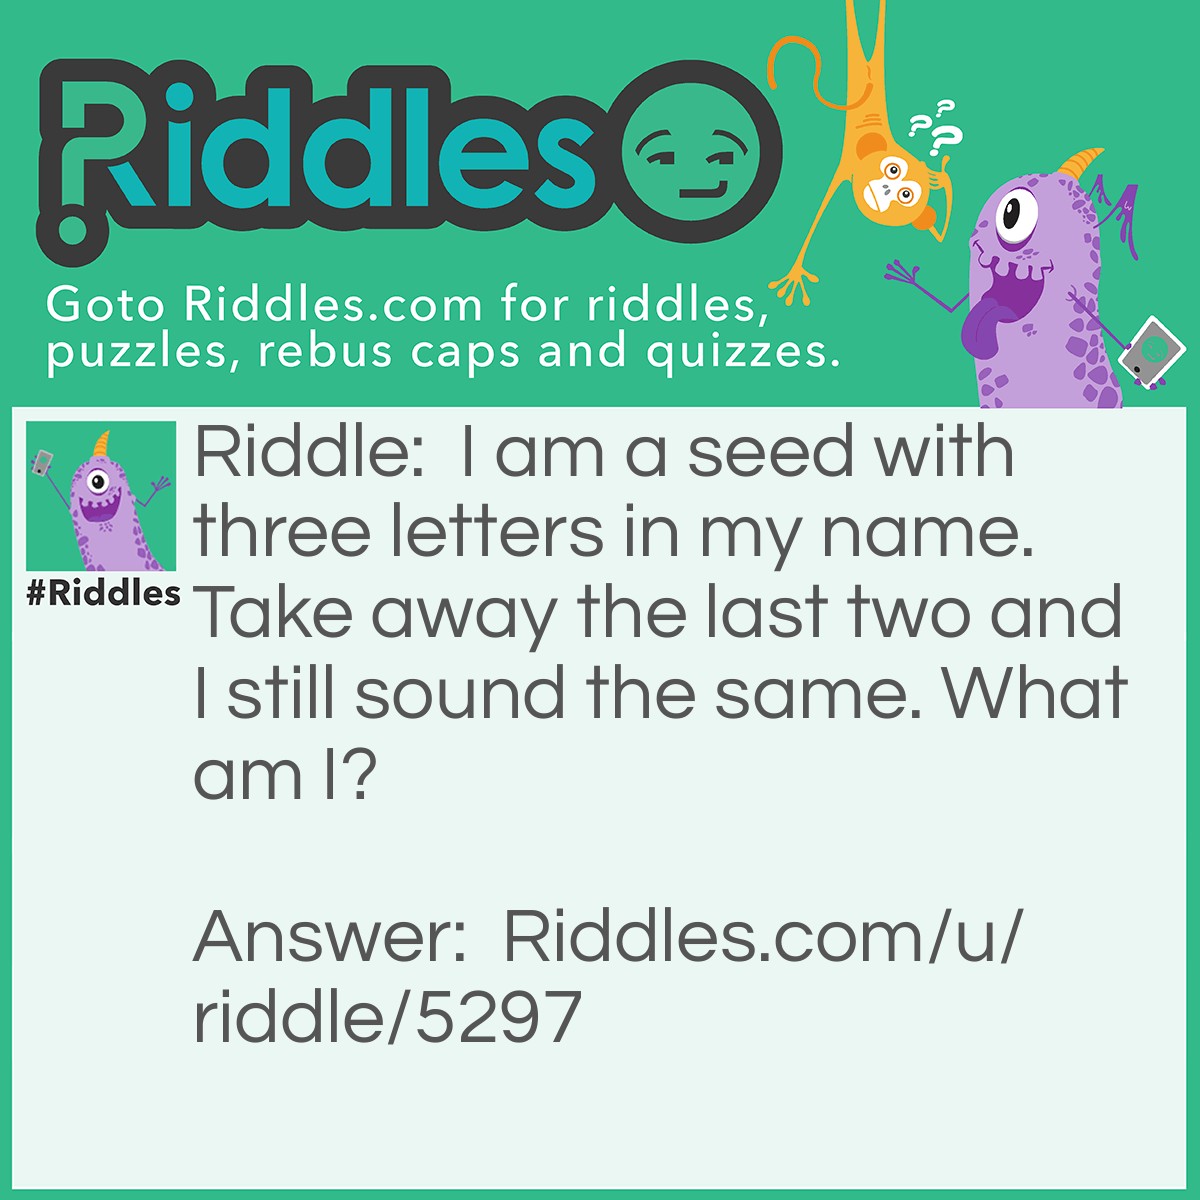 Riddle: I am a seed with three letters in my name. Take away the last two and I still sound the same. What am I? Answer: I'm Pea. When you take away the last 2 letters it's P, which sounds the same.